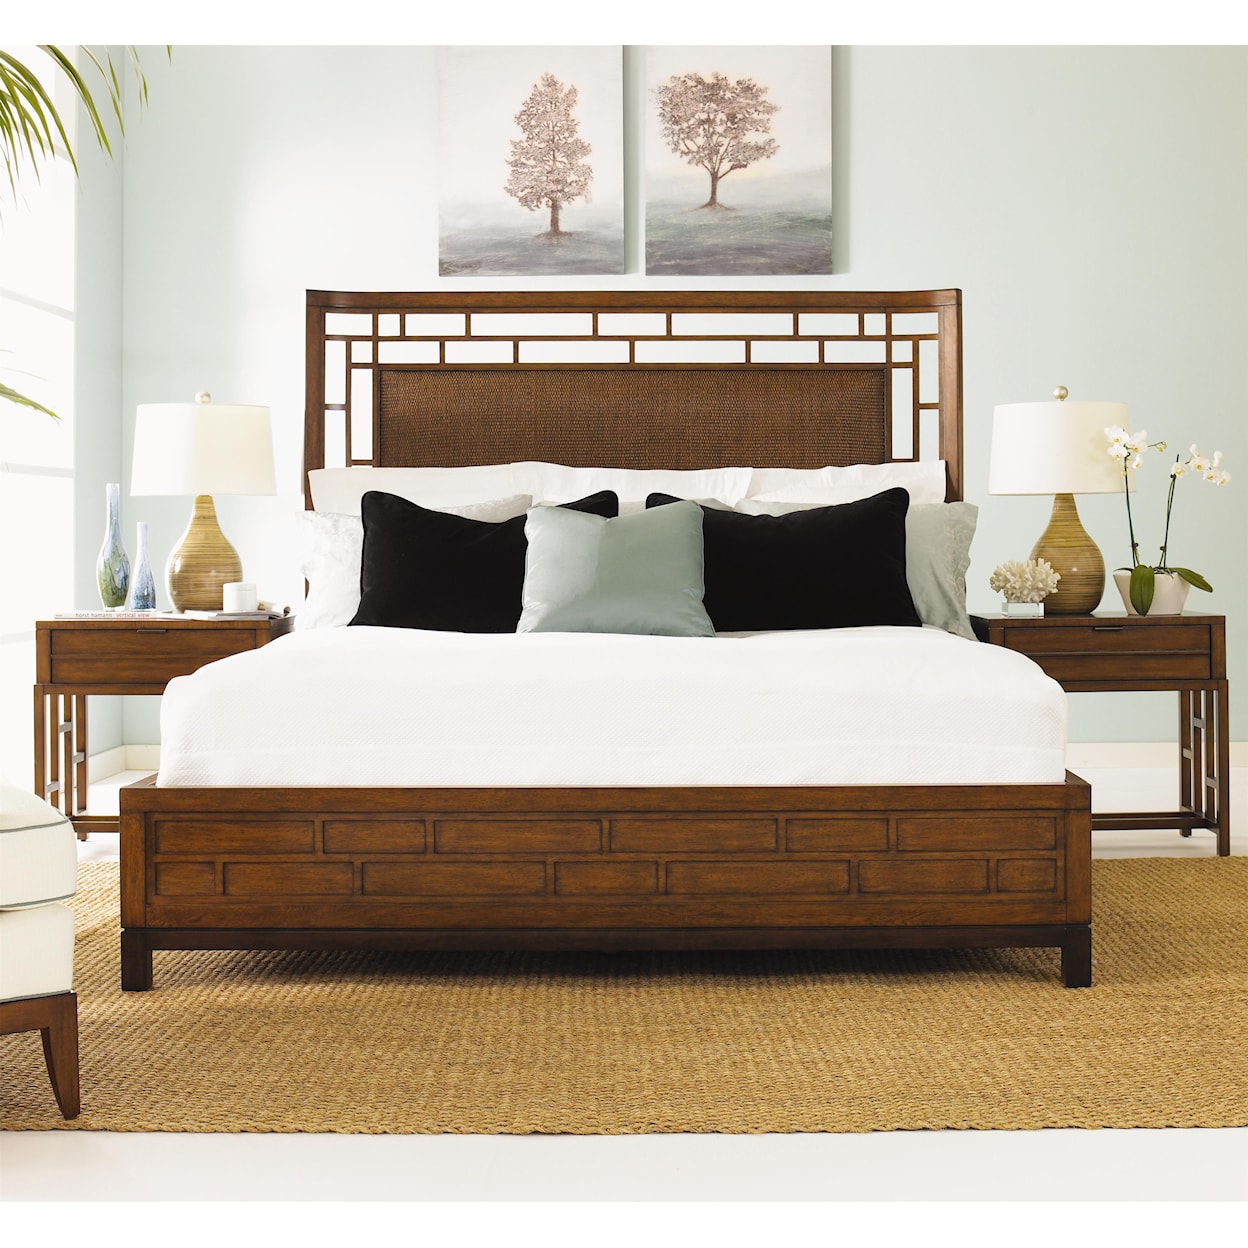 Tommy Bahama Home Ocean Club Queen Paradise Point Bed